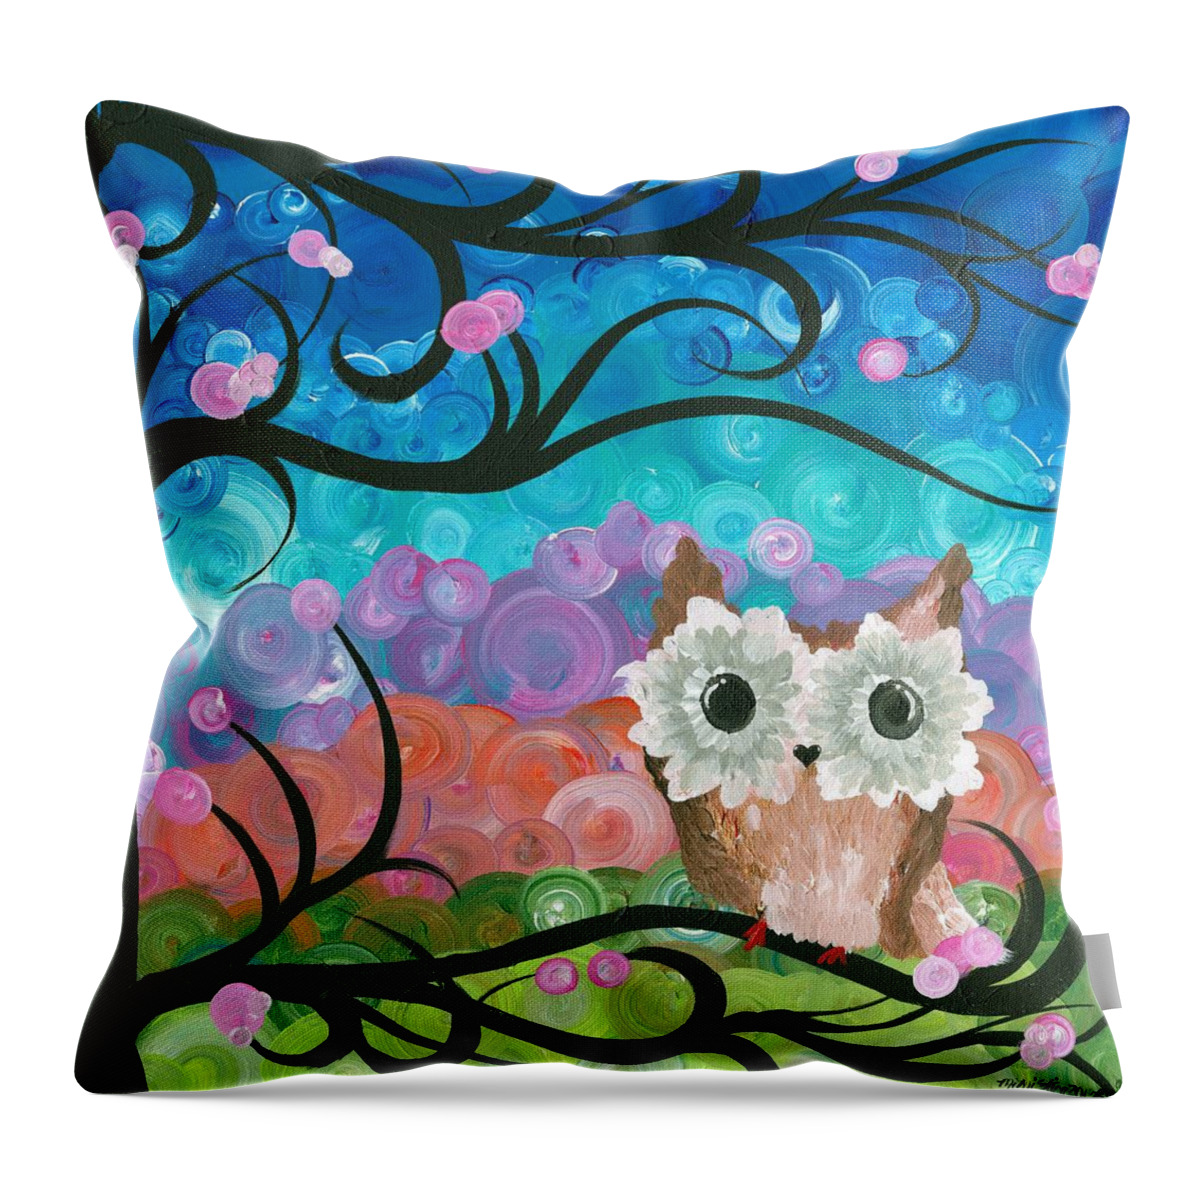 Owls Throw Pillow featuring the painting Owl Expressions - 01 by MiMi Stirn